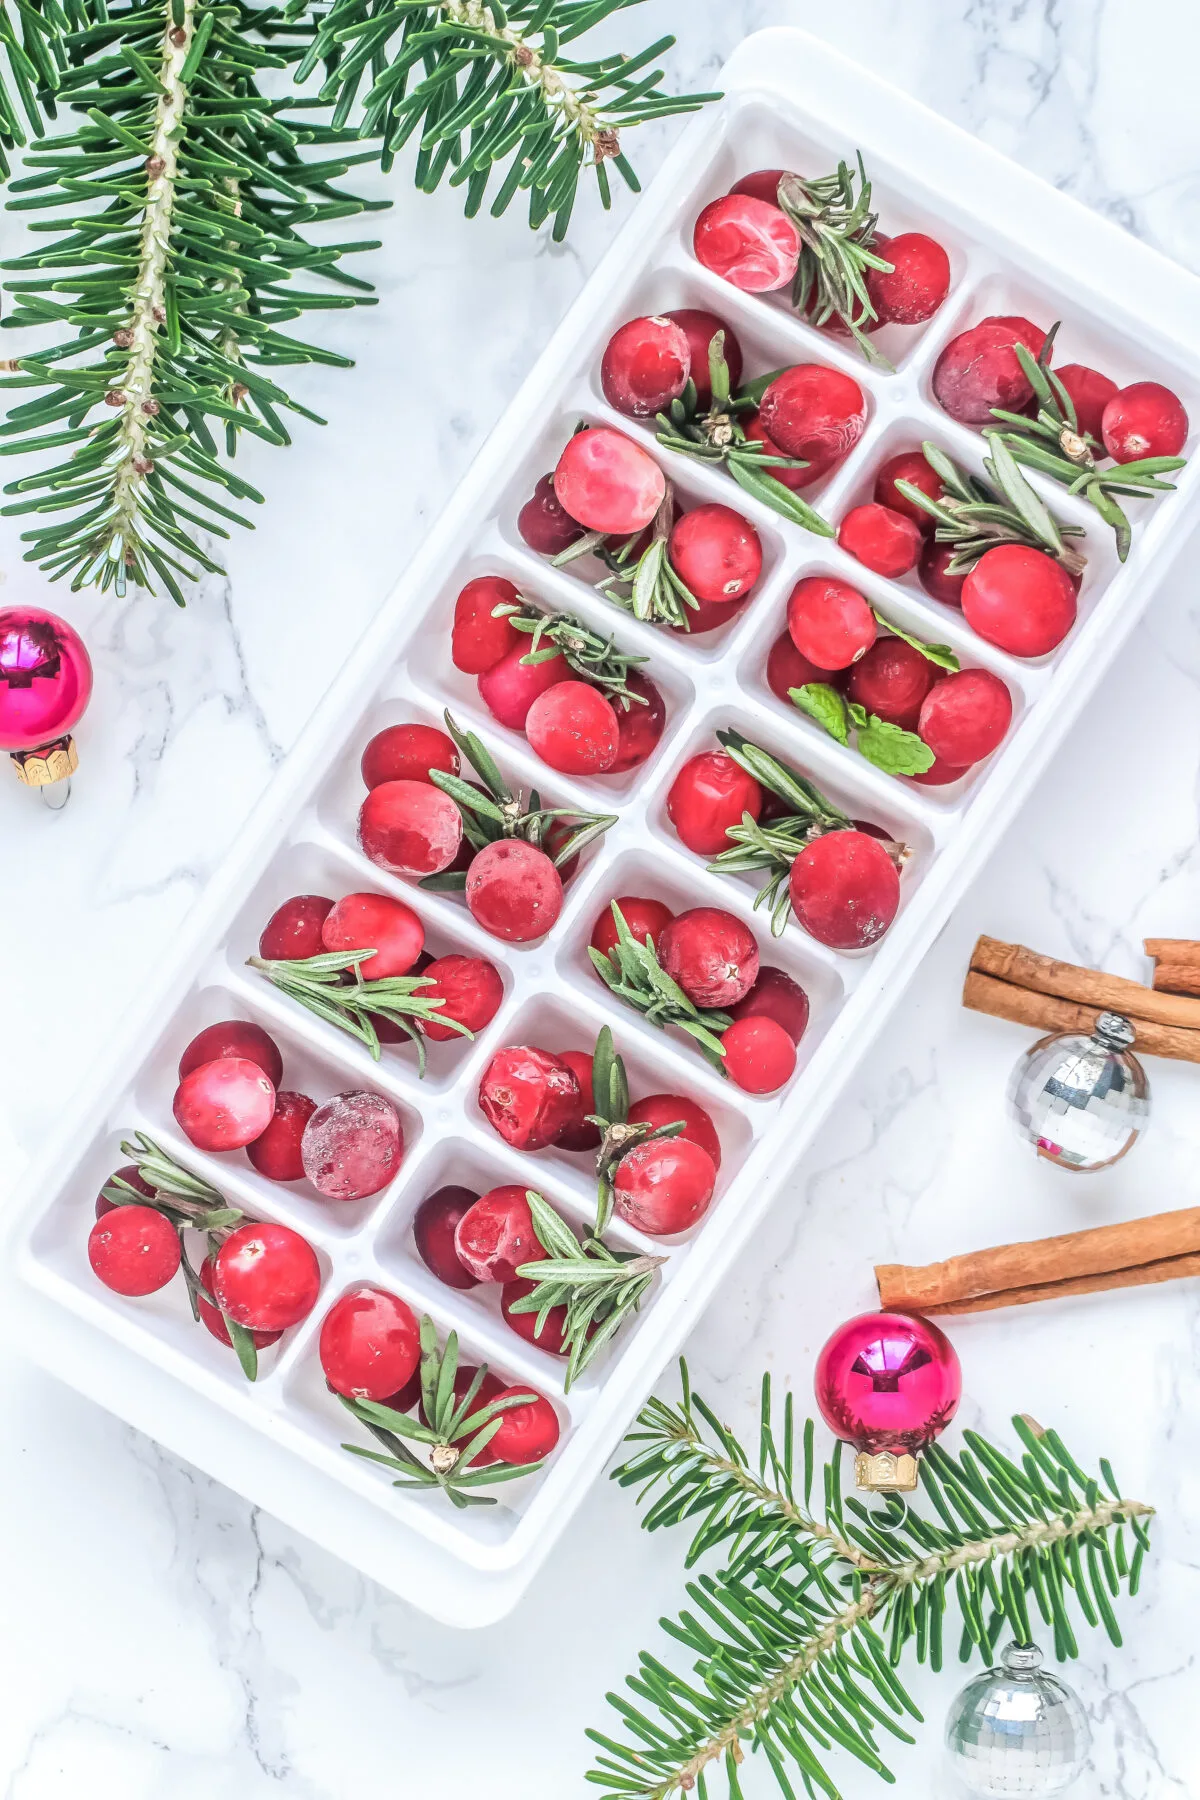 Cranberries and fresh herbs packed inside an ice cube tray.